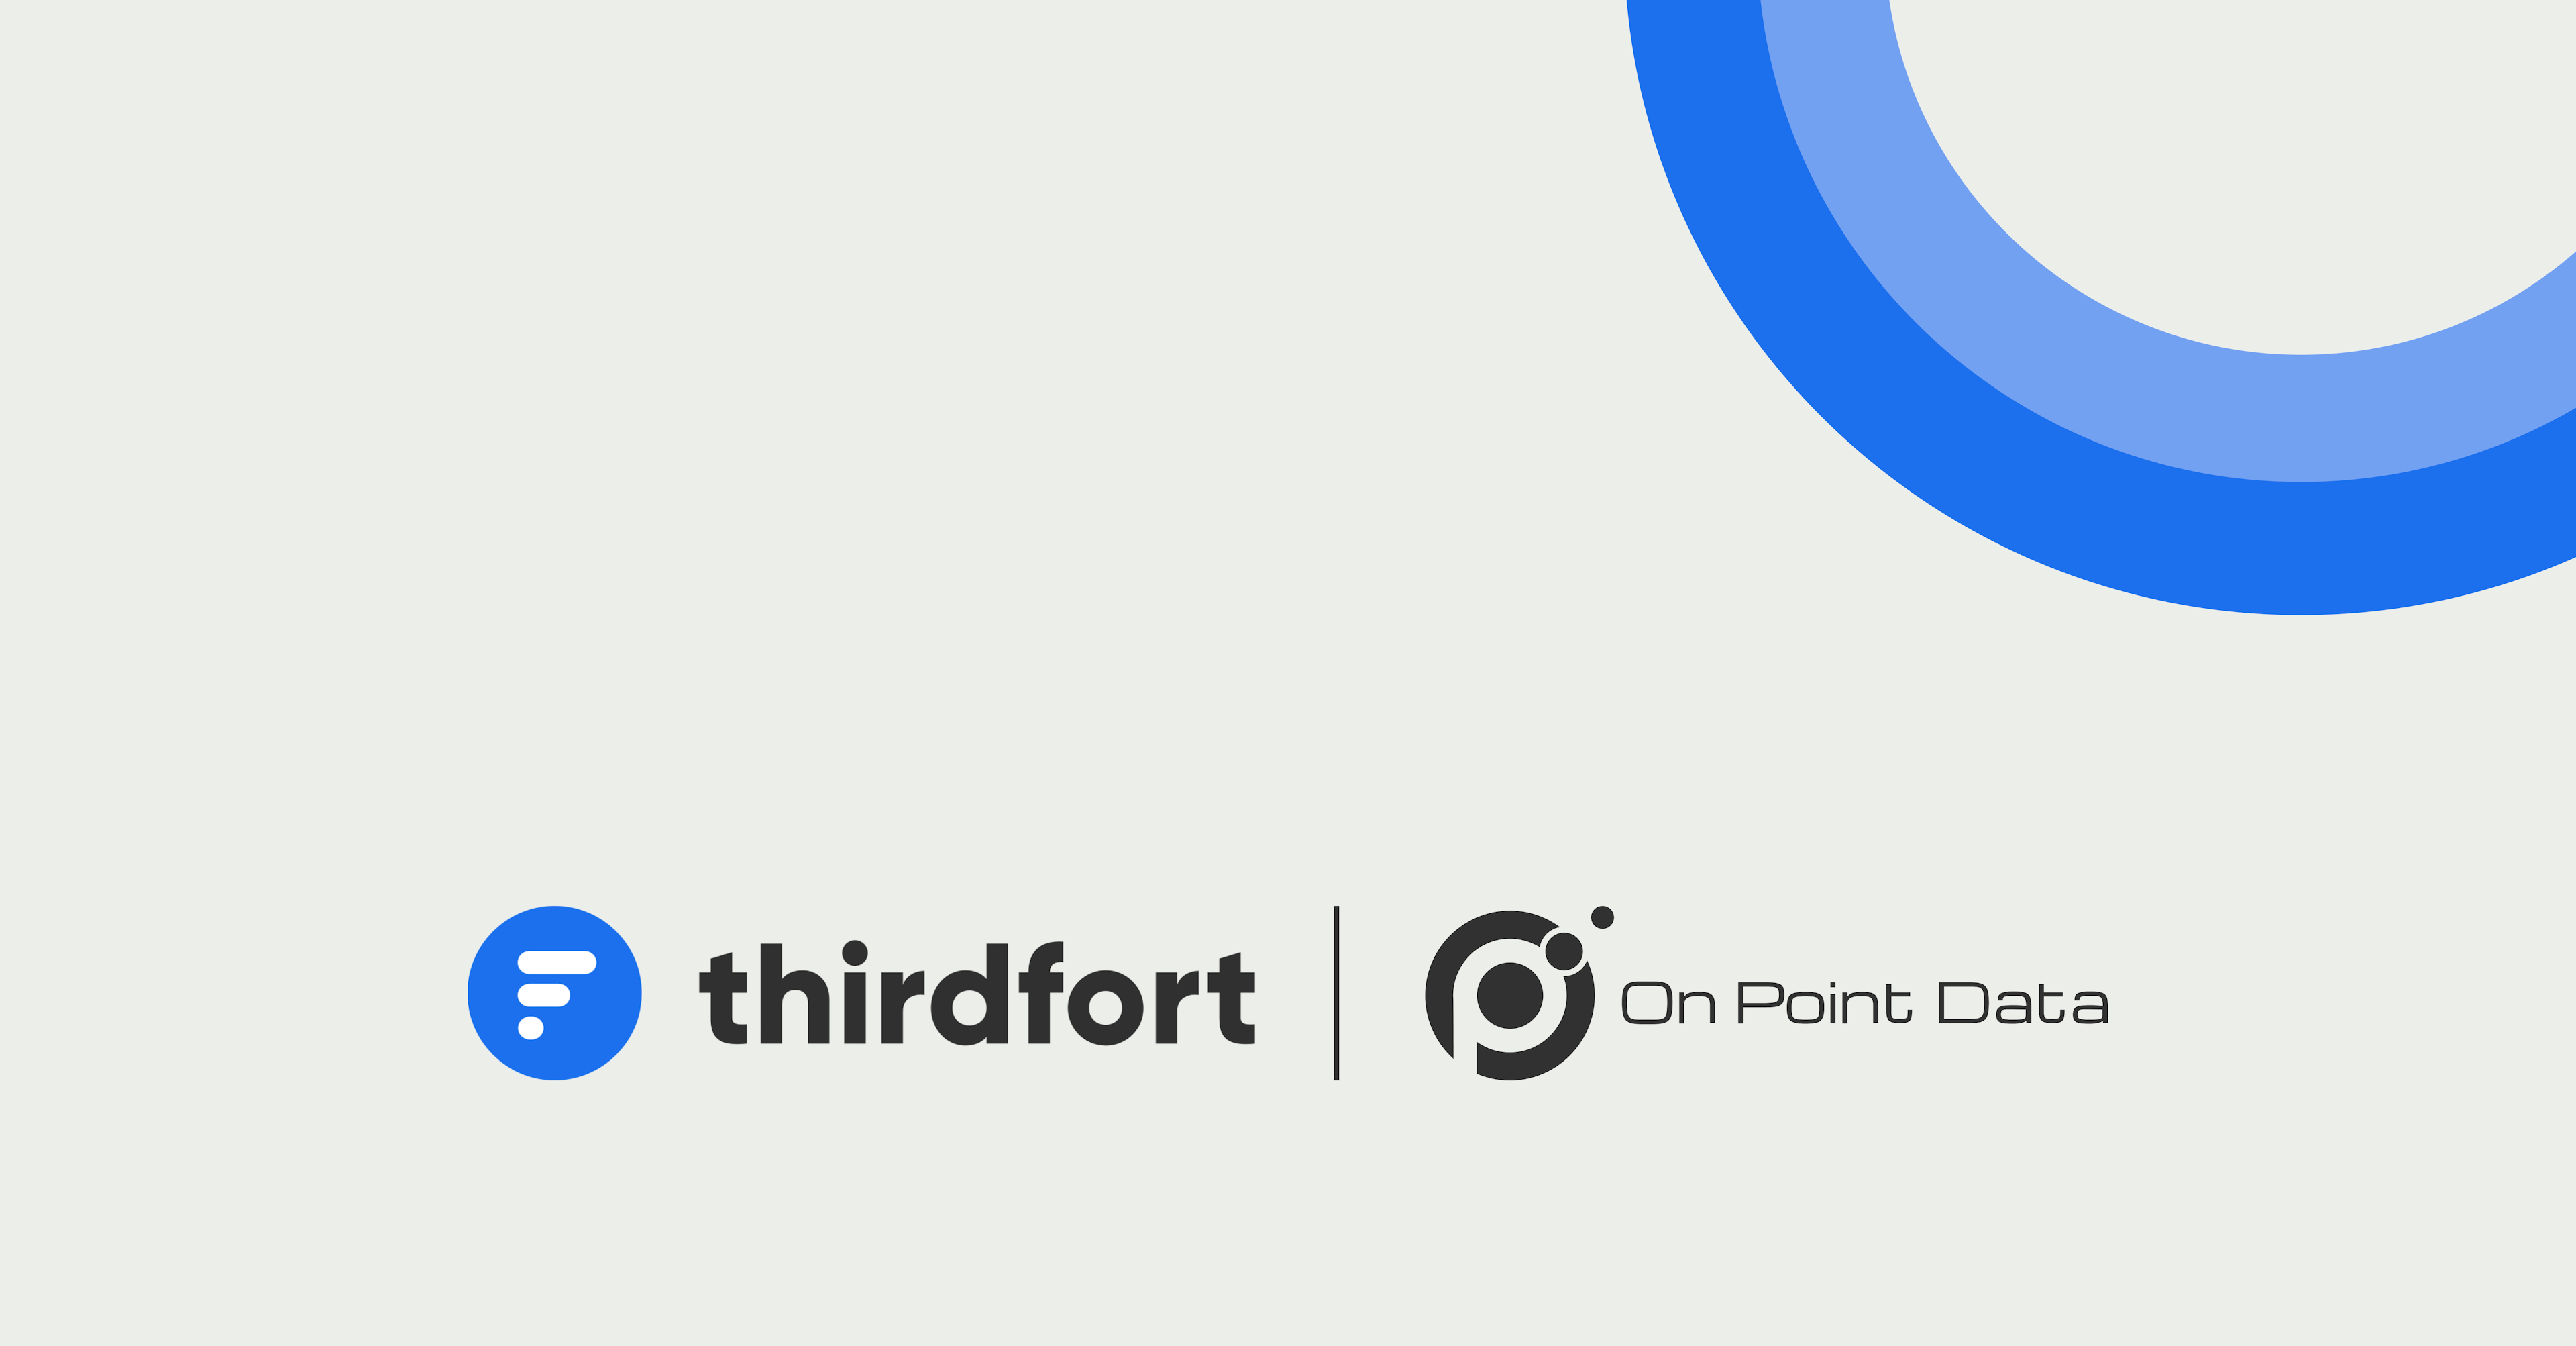 Thirdfort logo and On Point Data logo on grey background with blue circle in top right